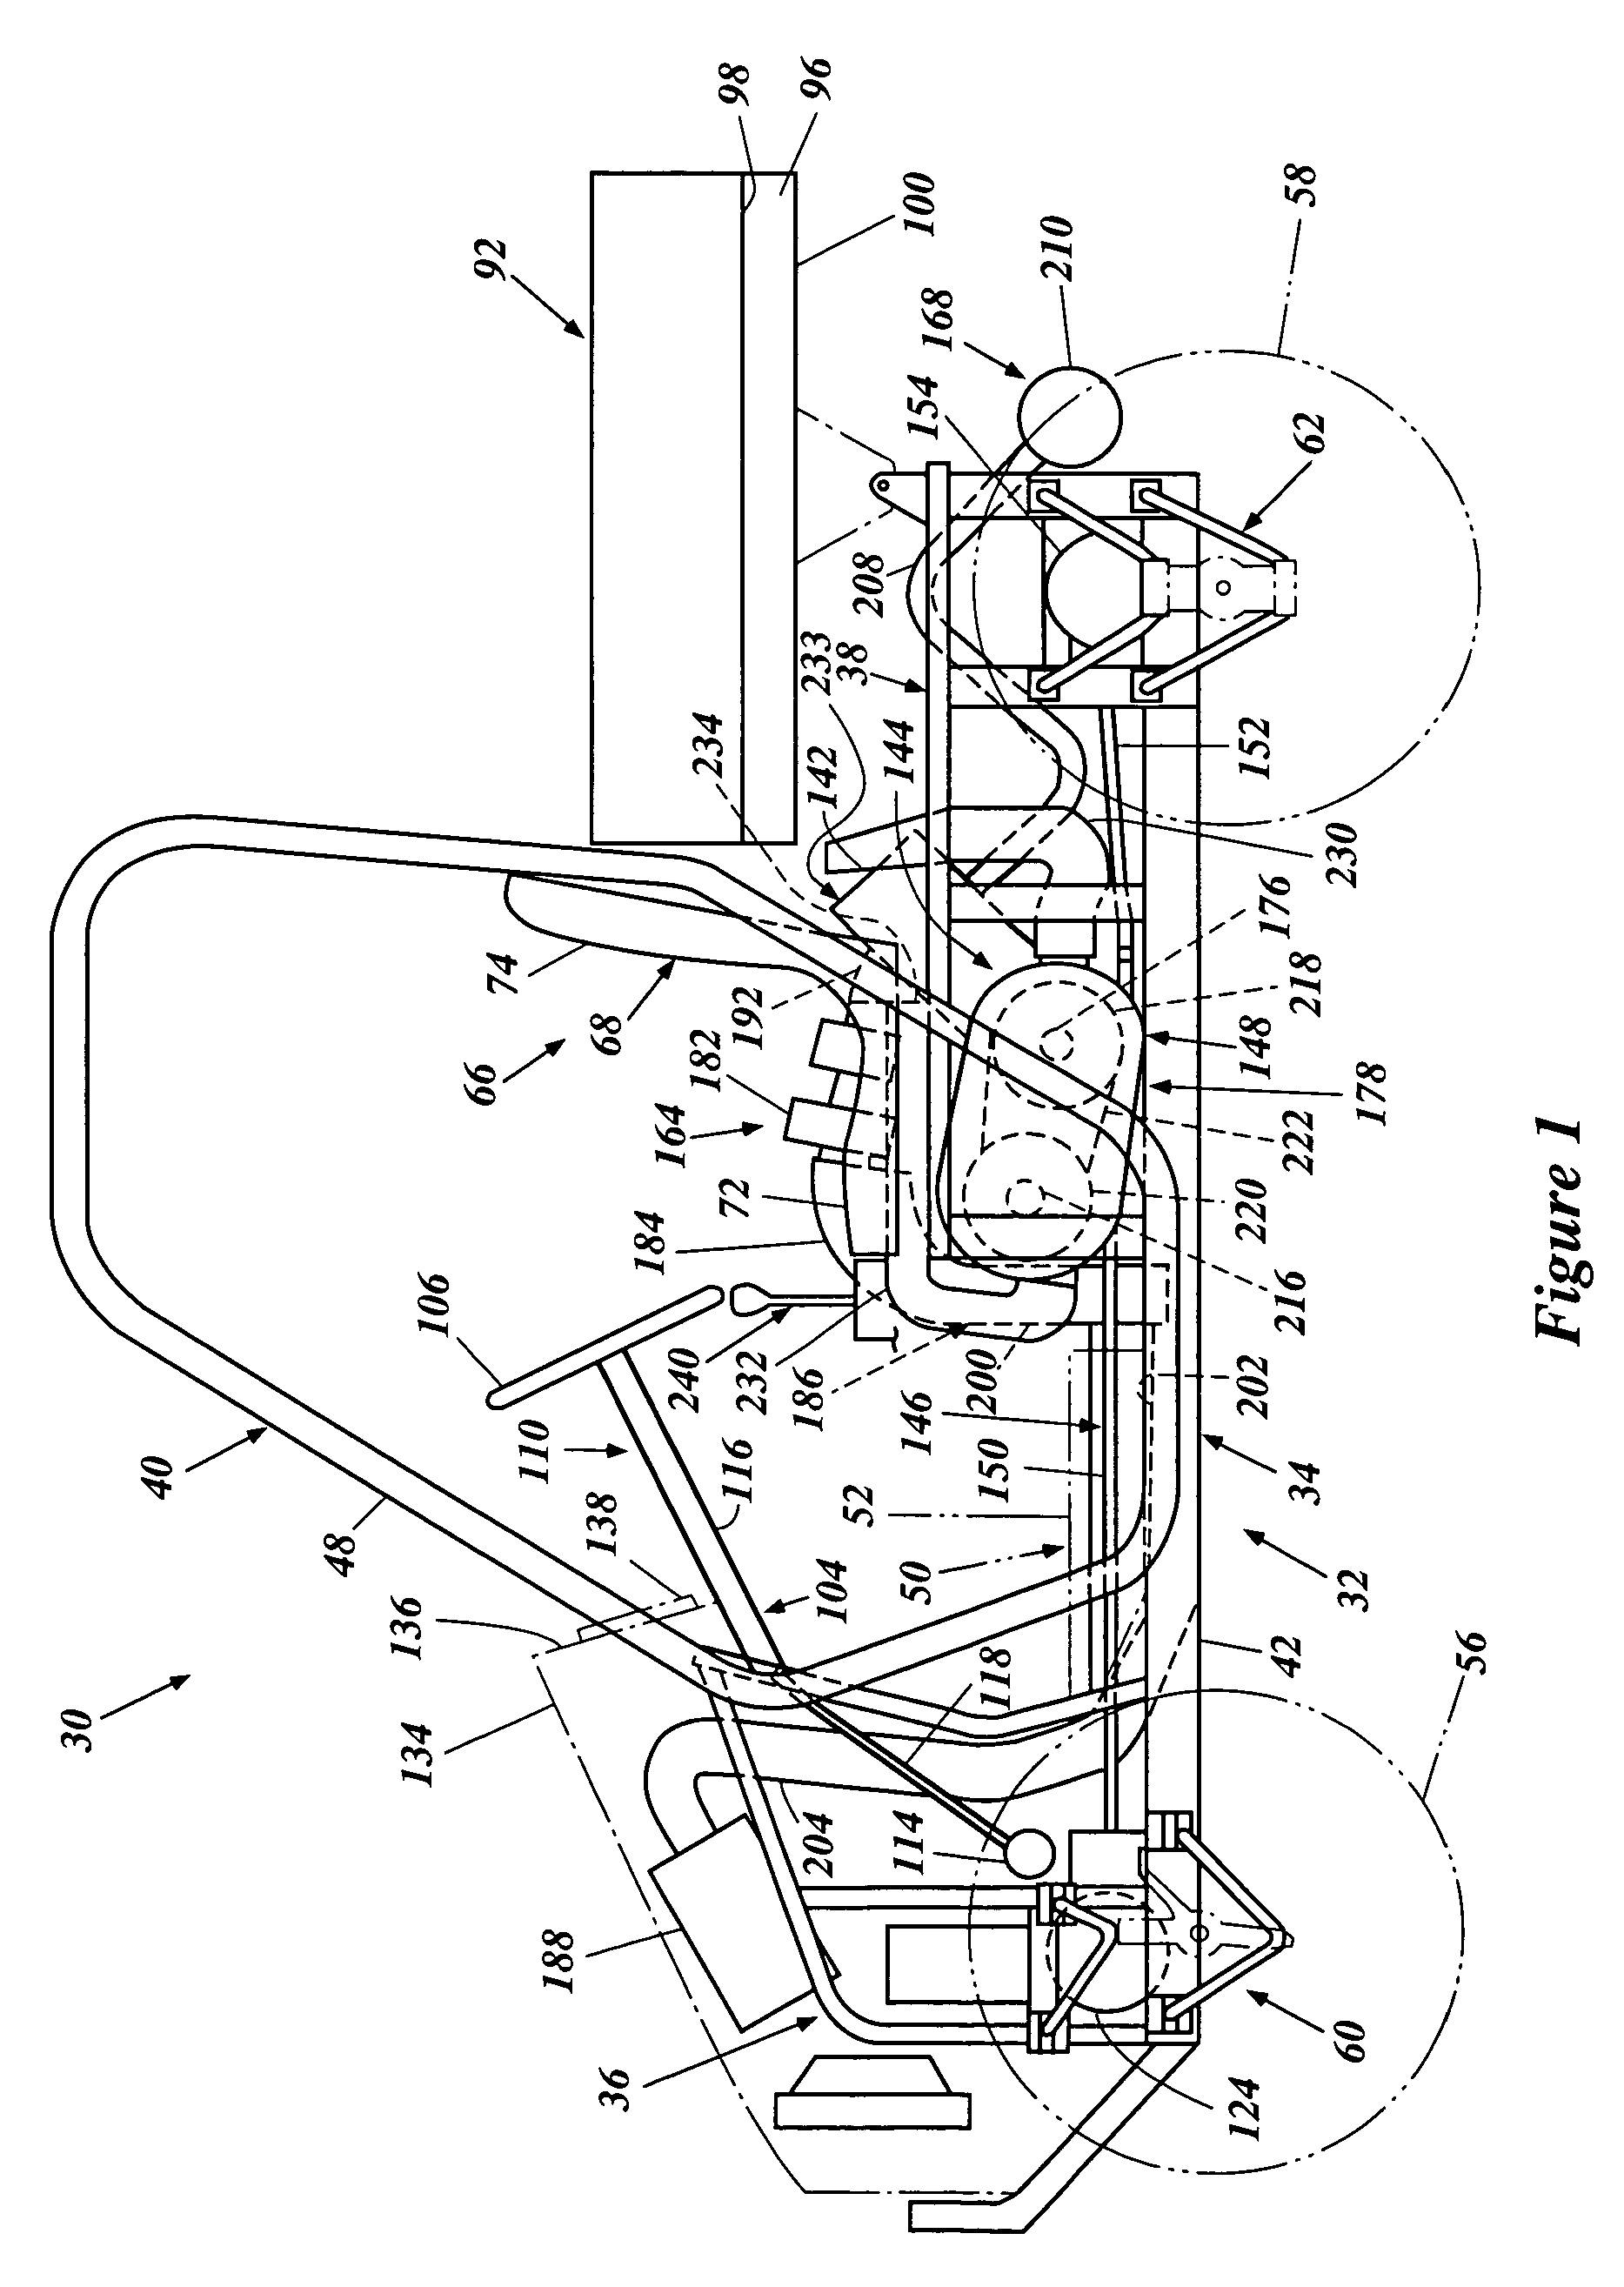 Air intake system for off-road vehicle